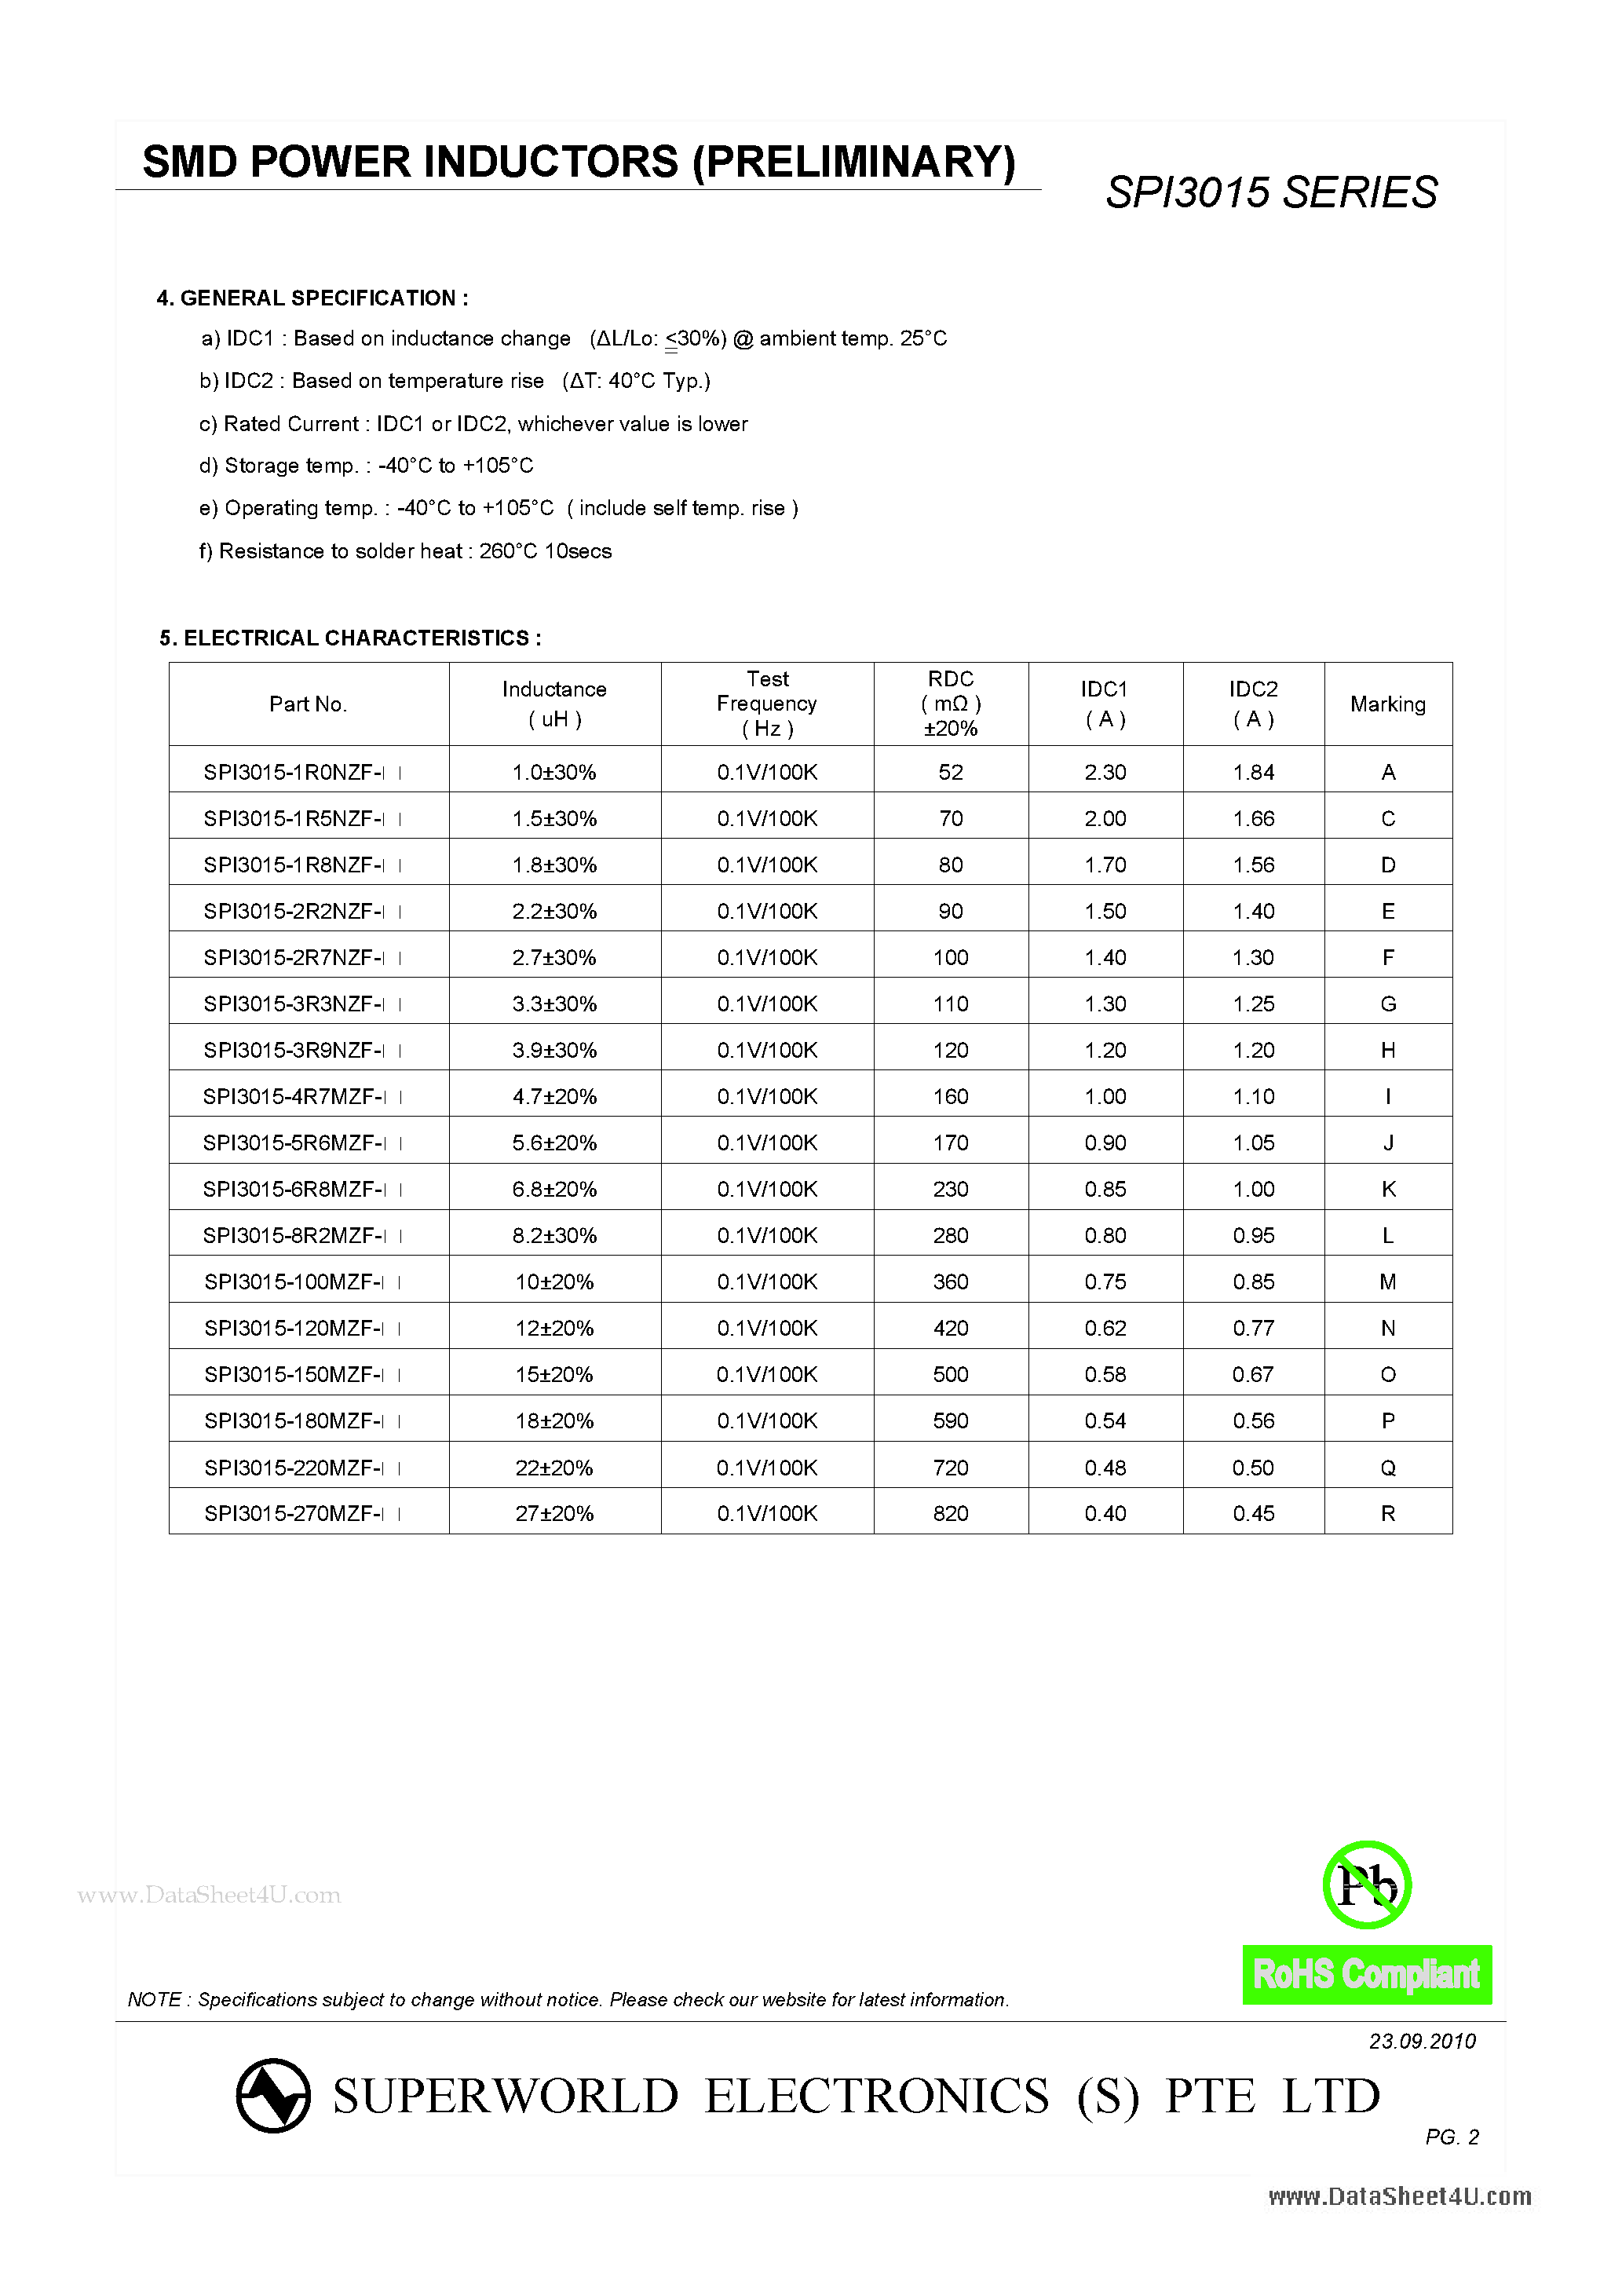 Datasheet SPI3015 - SMD POWER INDUCTORS page 2